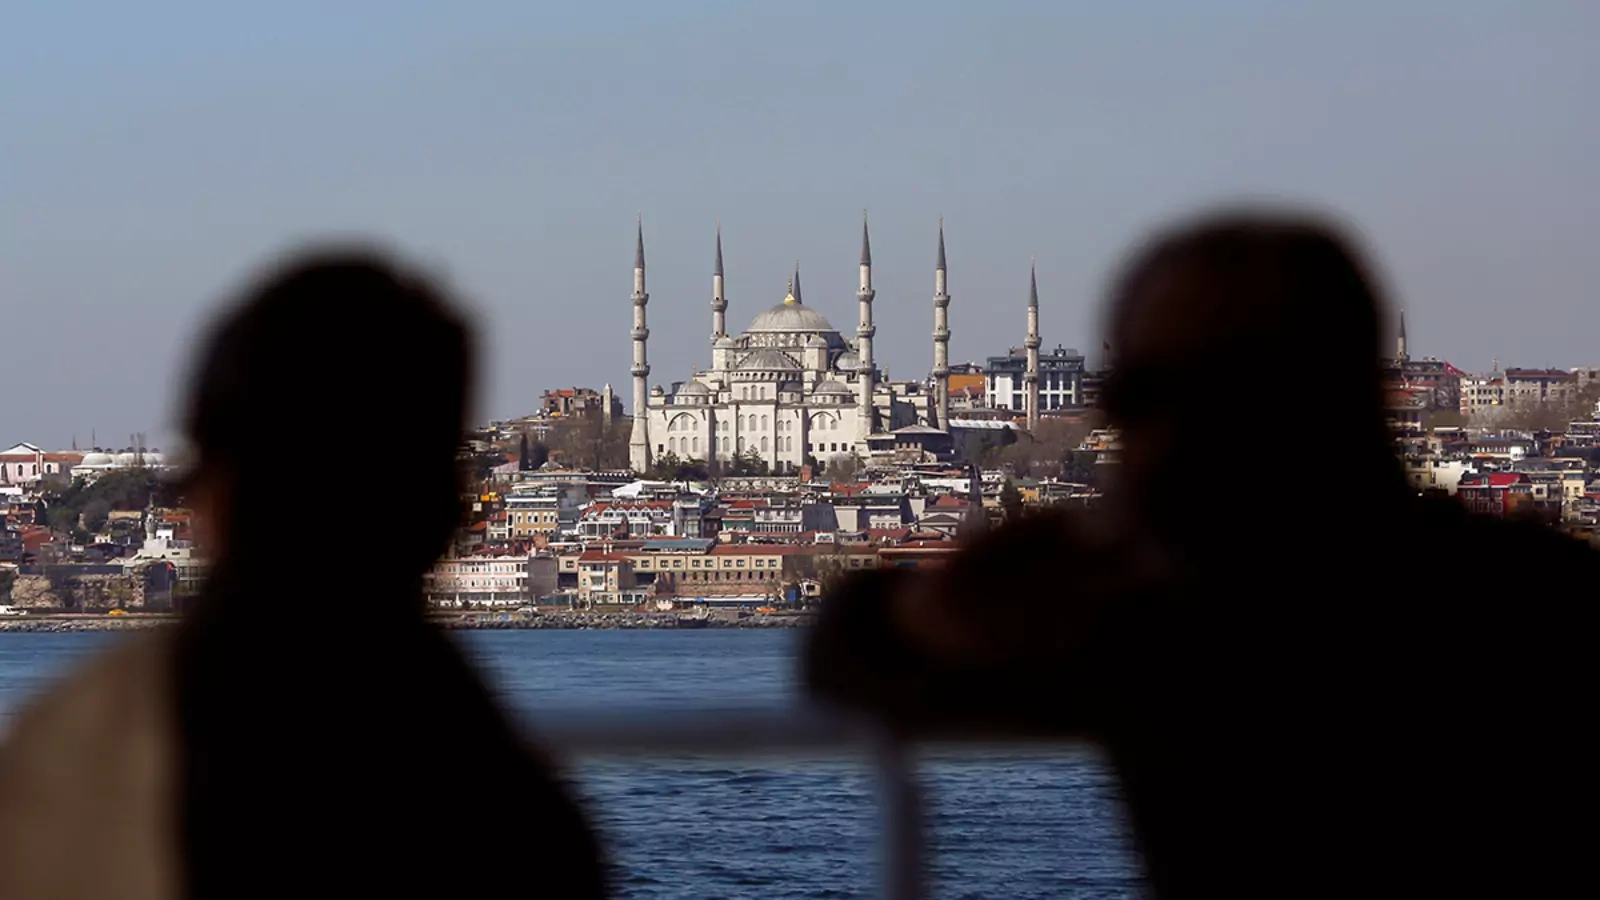 The Blue Mosque, also called the Sultanahmet Mosque, is seen from a ferry in Istanbul, Turkey's largest city, on April 11, 2017.